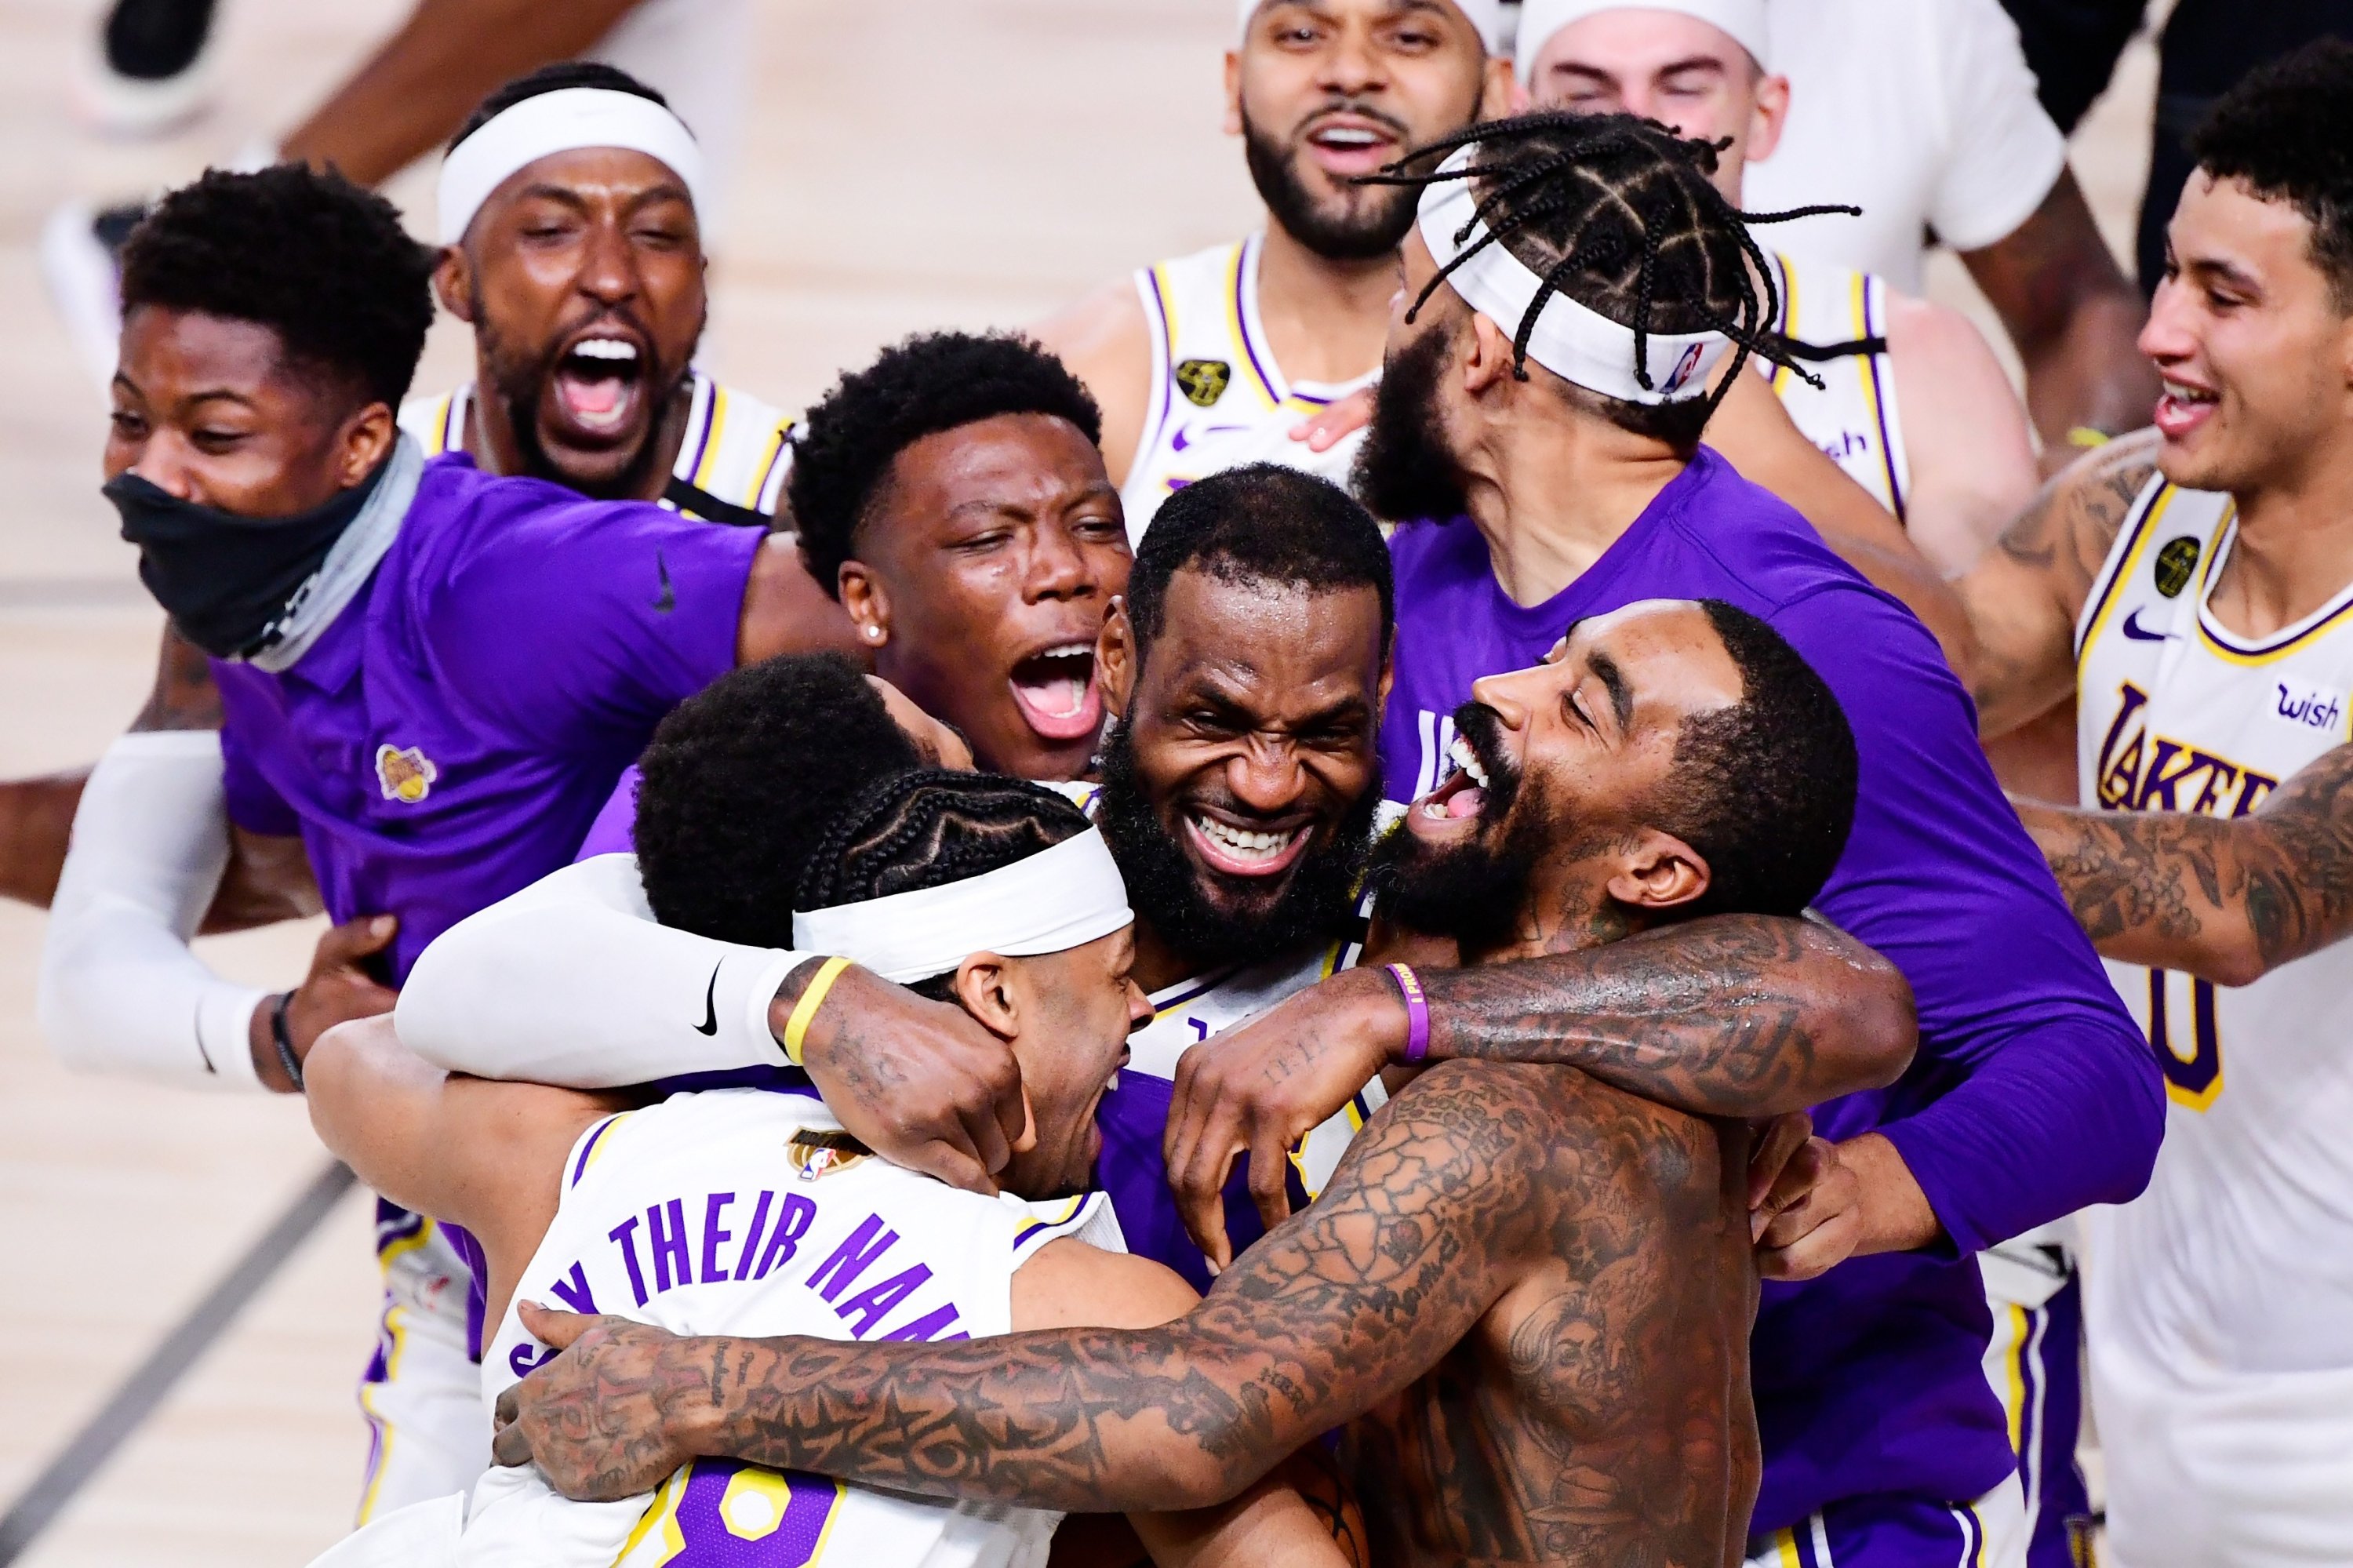 Los Angeles Lakers players celebrate winning the 2020 NBA championship in Game 6 of the Finals, in Lake Buena Vista, Florida, U.S., Oct. 11, 2020. (AFP Photo)